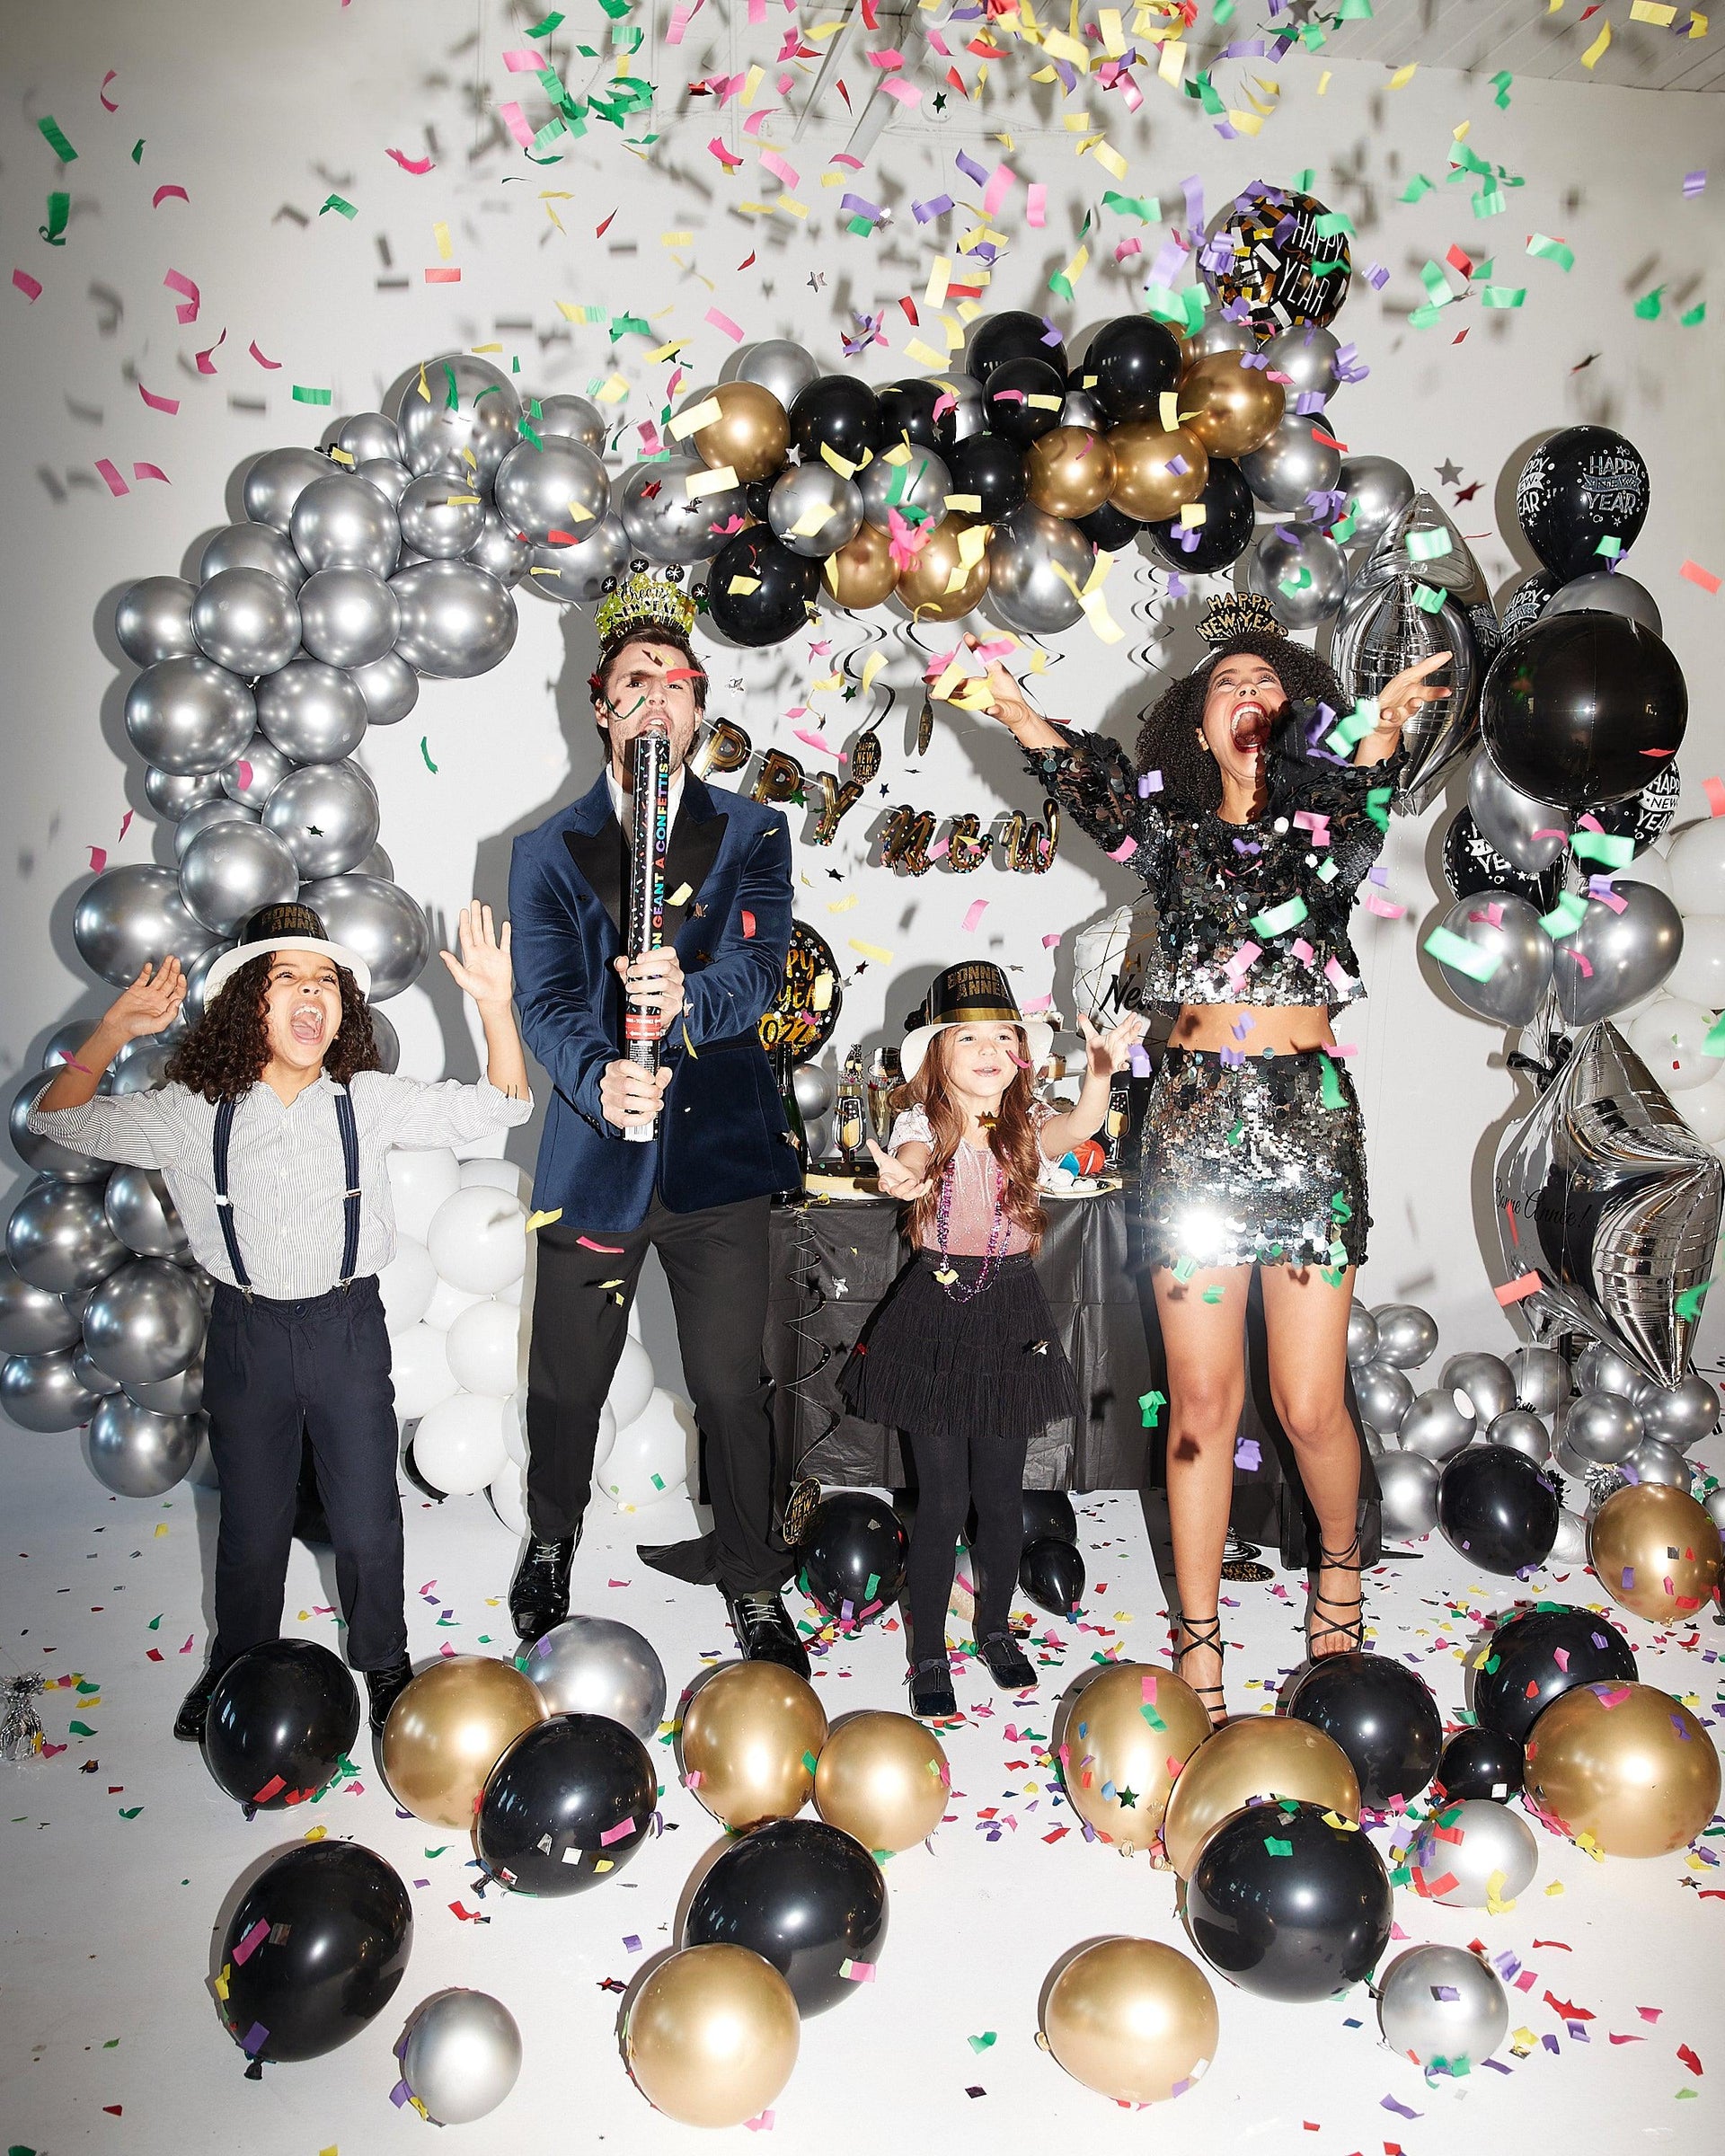 A woman, a man, a little girl and a little boy are celebrating New Year's Eve together. They have a lot of fun surrounded by many balloons, decorations and confetti. The colour theme is silver, gold and black and it is very sparkly.